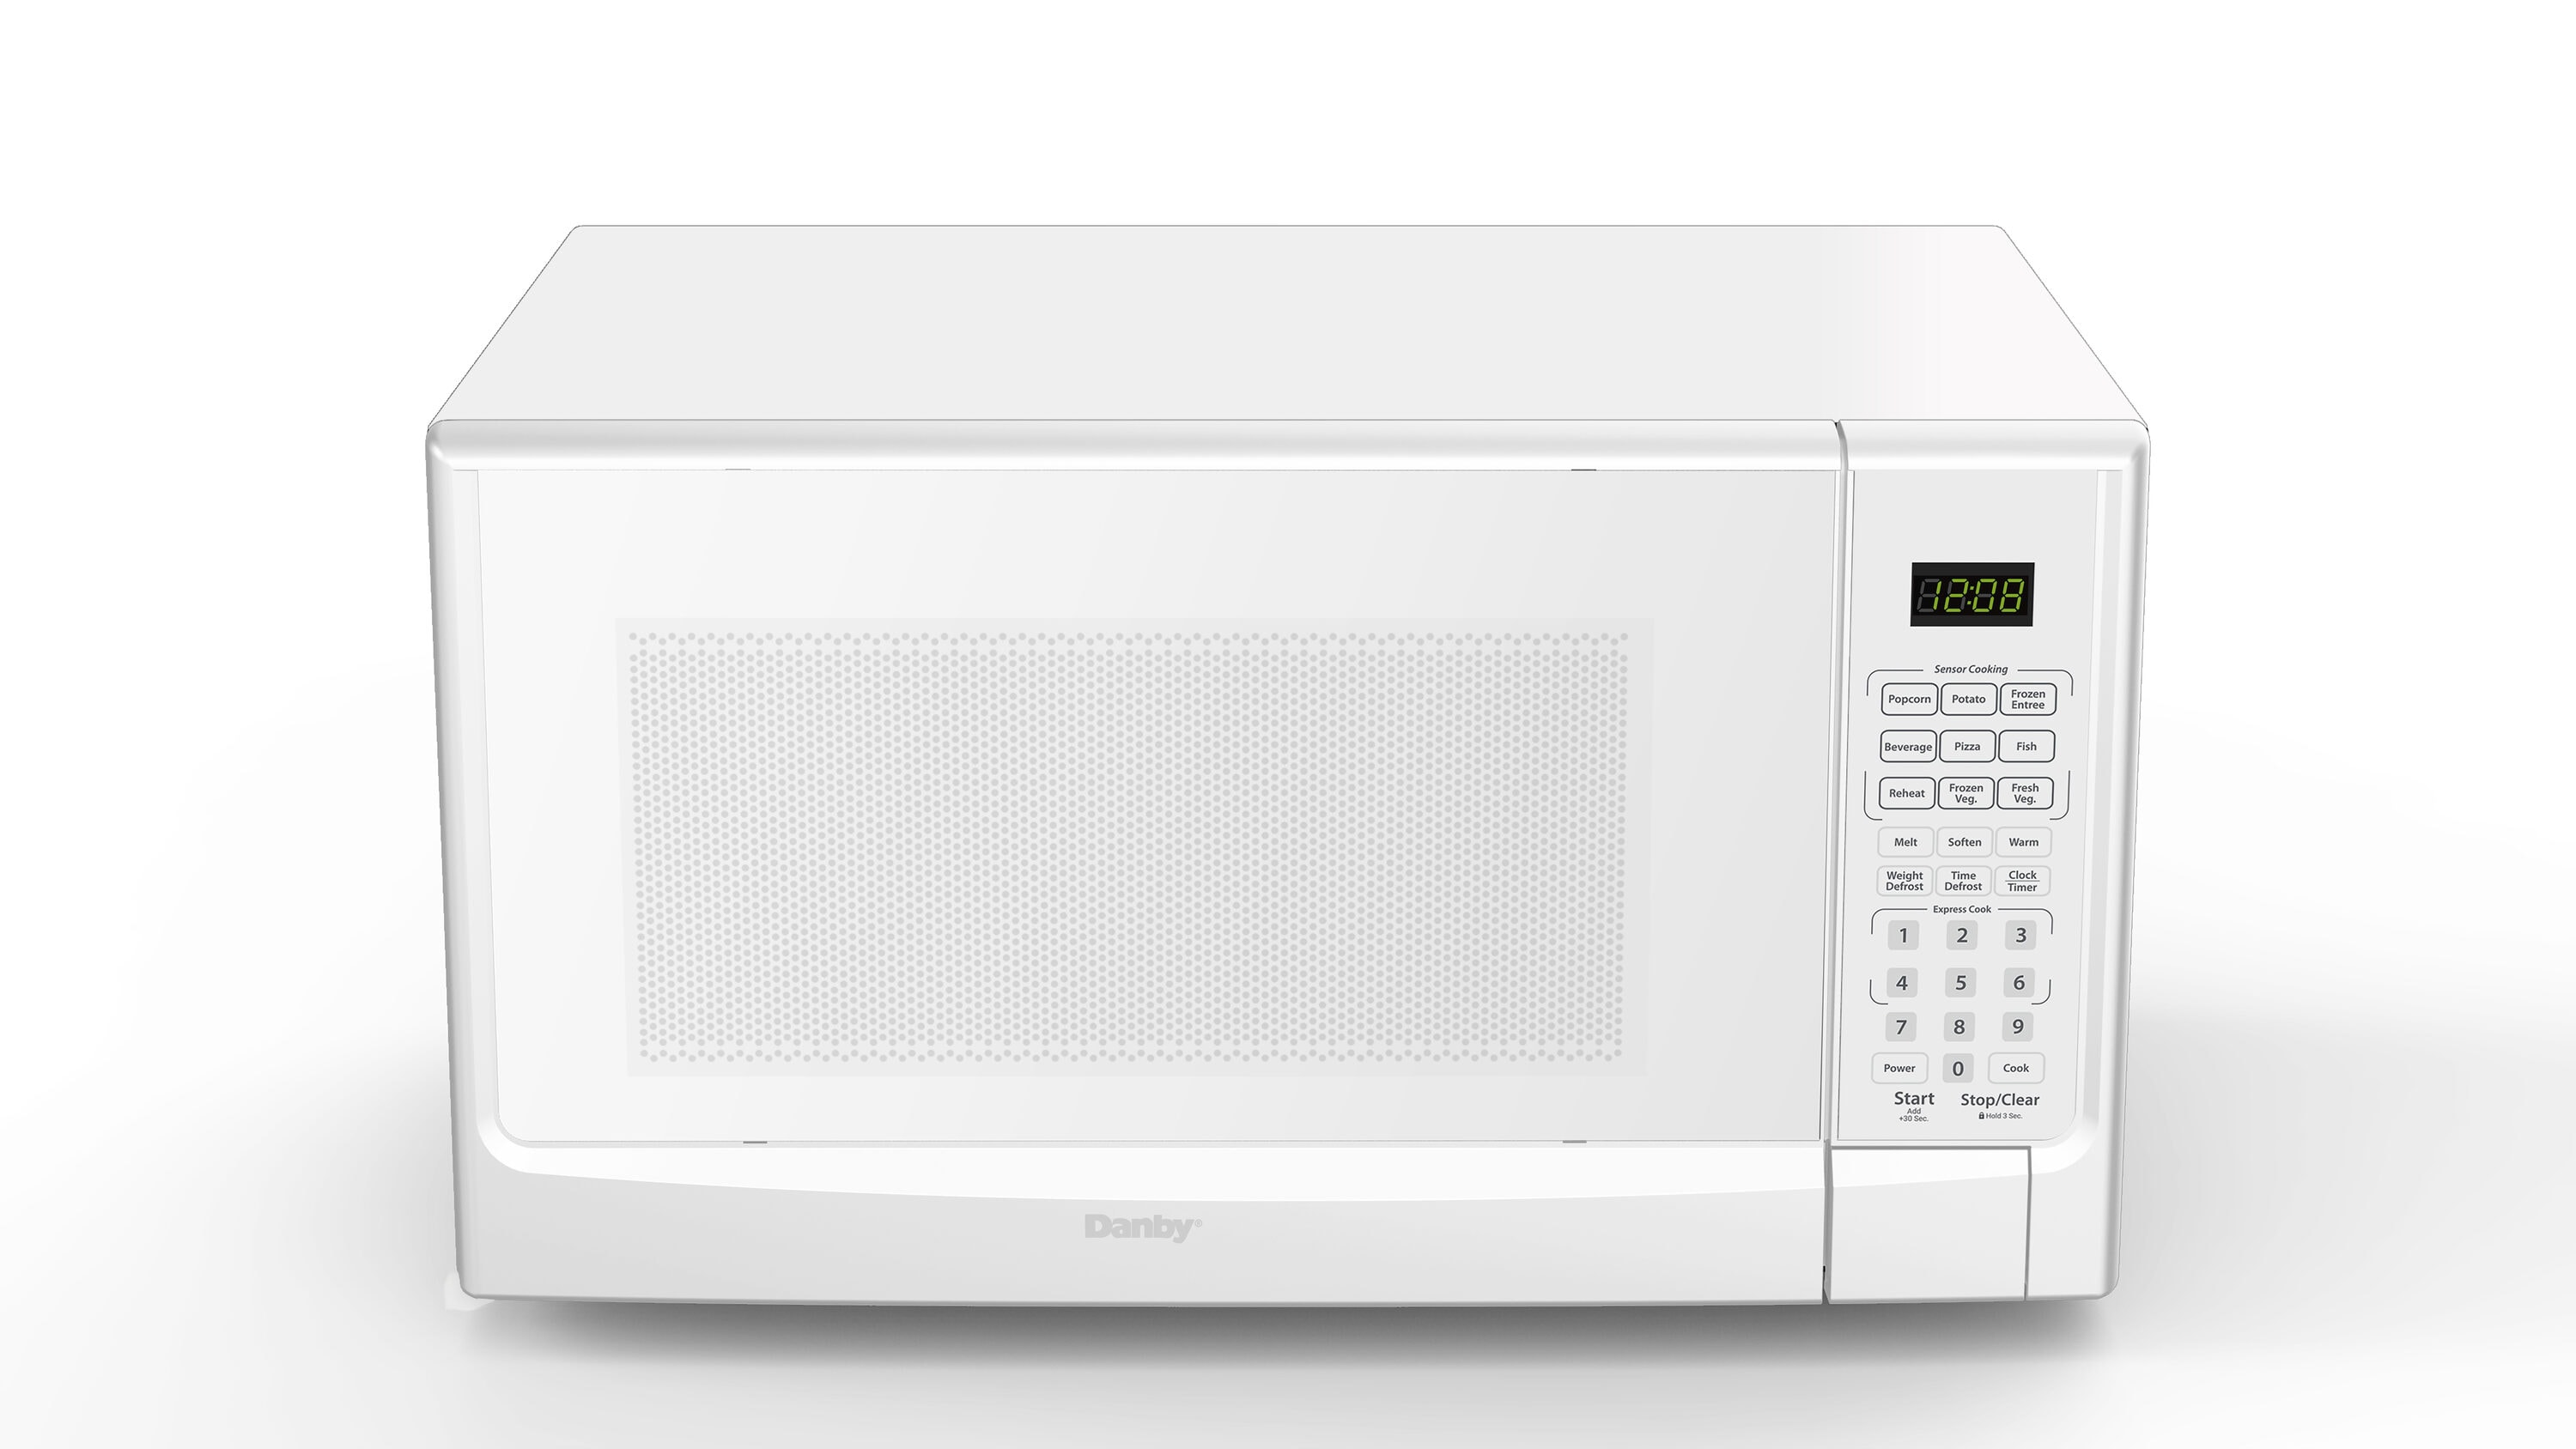 Danby Compact 0.7 Cu. Ft. 700W Countertop Microwave Oven in White